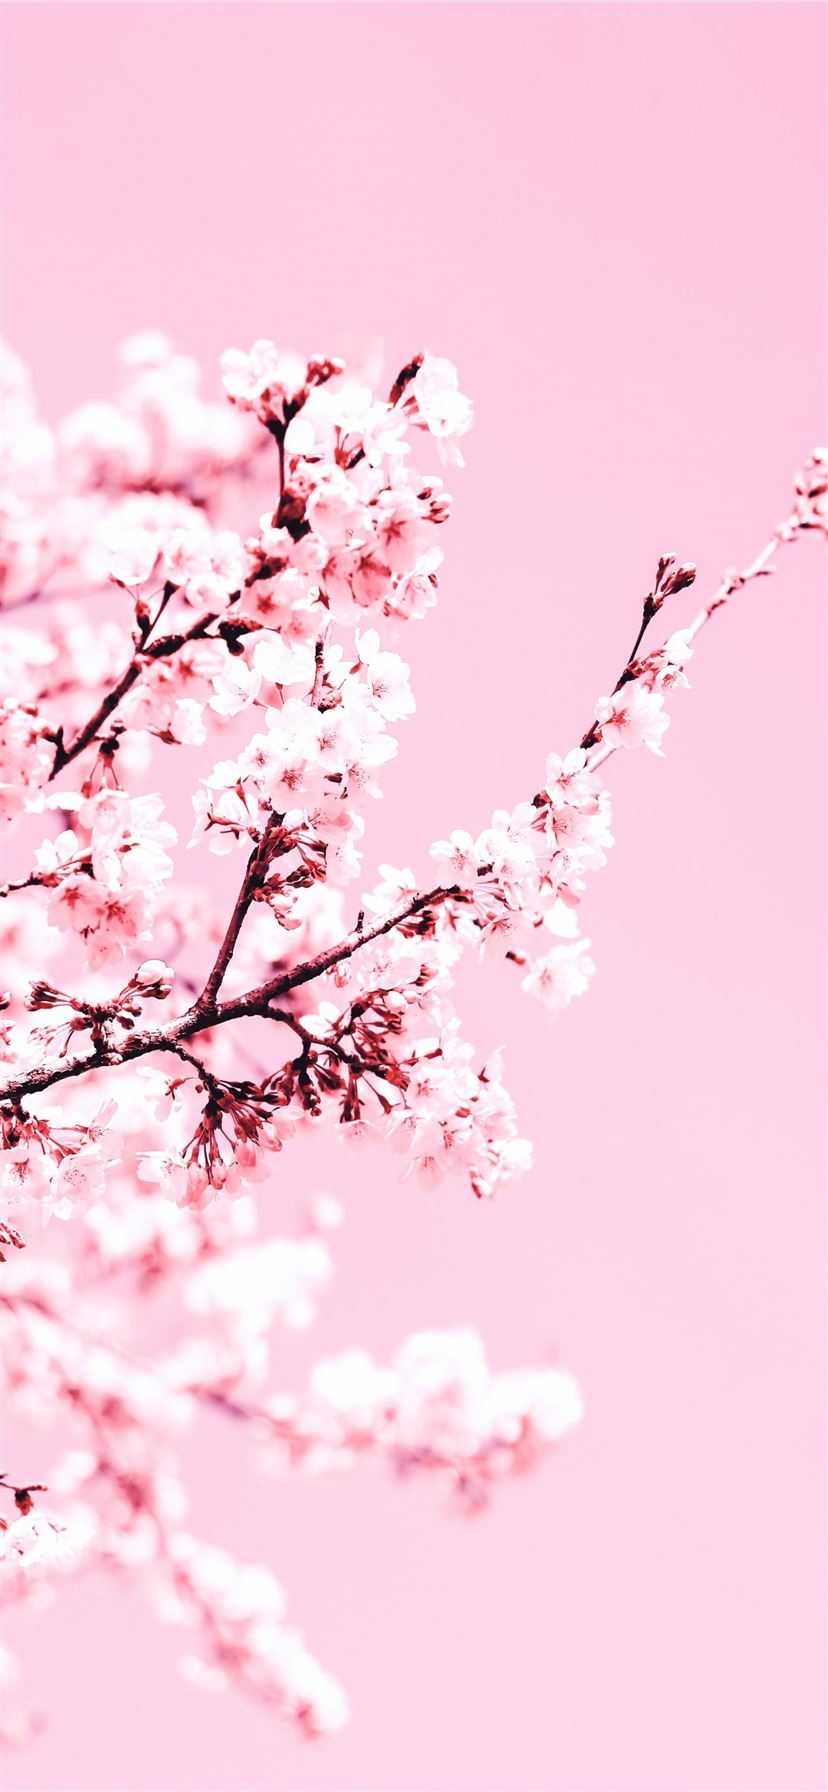 A pink background with white flowers on it - Cherry blossom